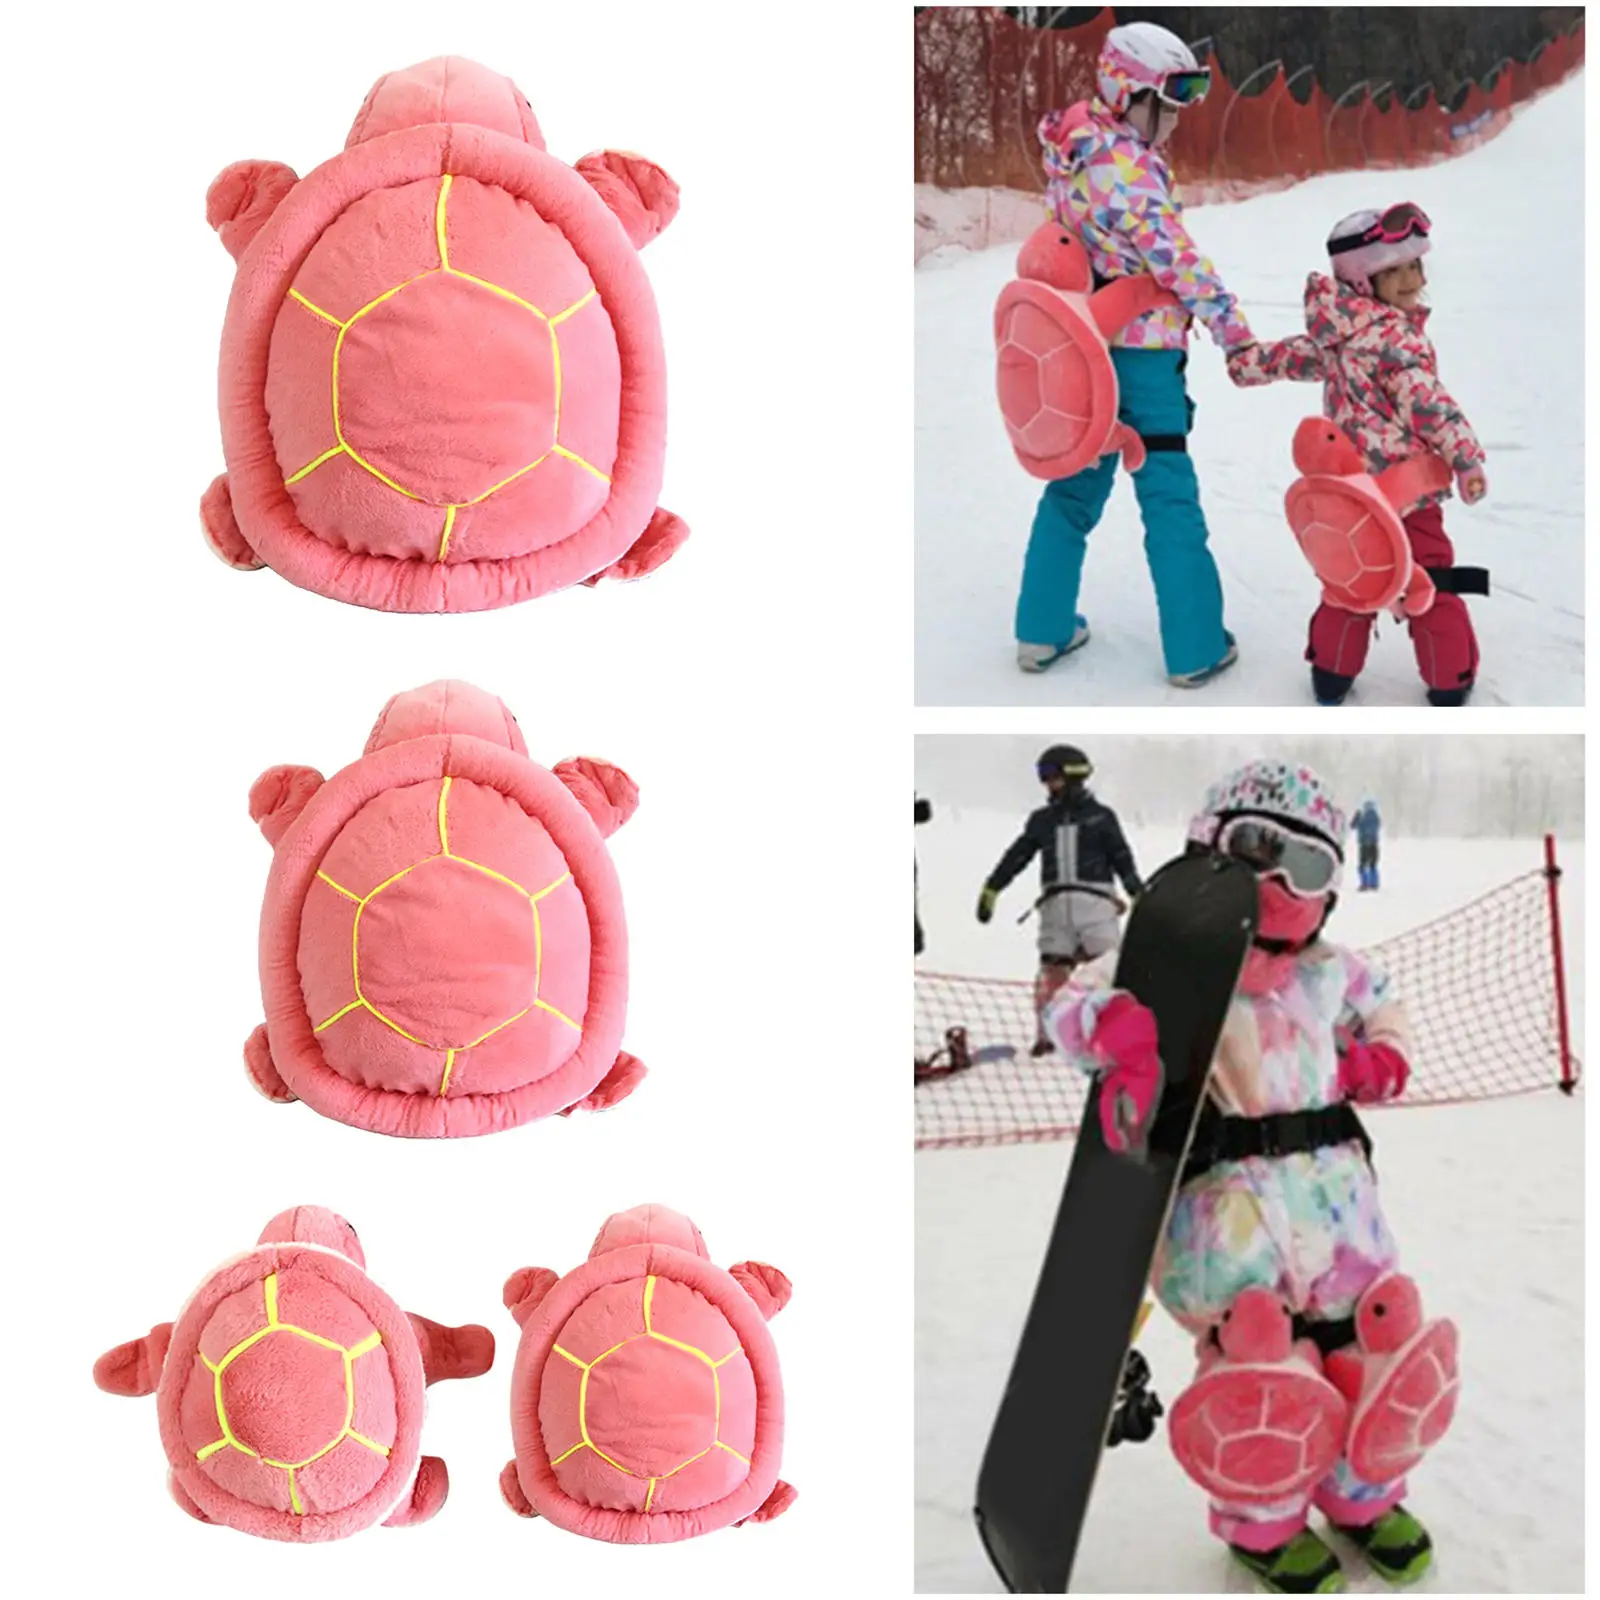 Ski Protective Gear Knee Pad Butt Pad Anti-Frost Adjustable Protection for Scooters Skating Figure Skating Roller Skating